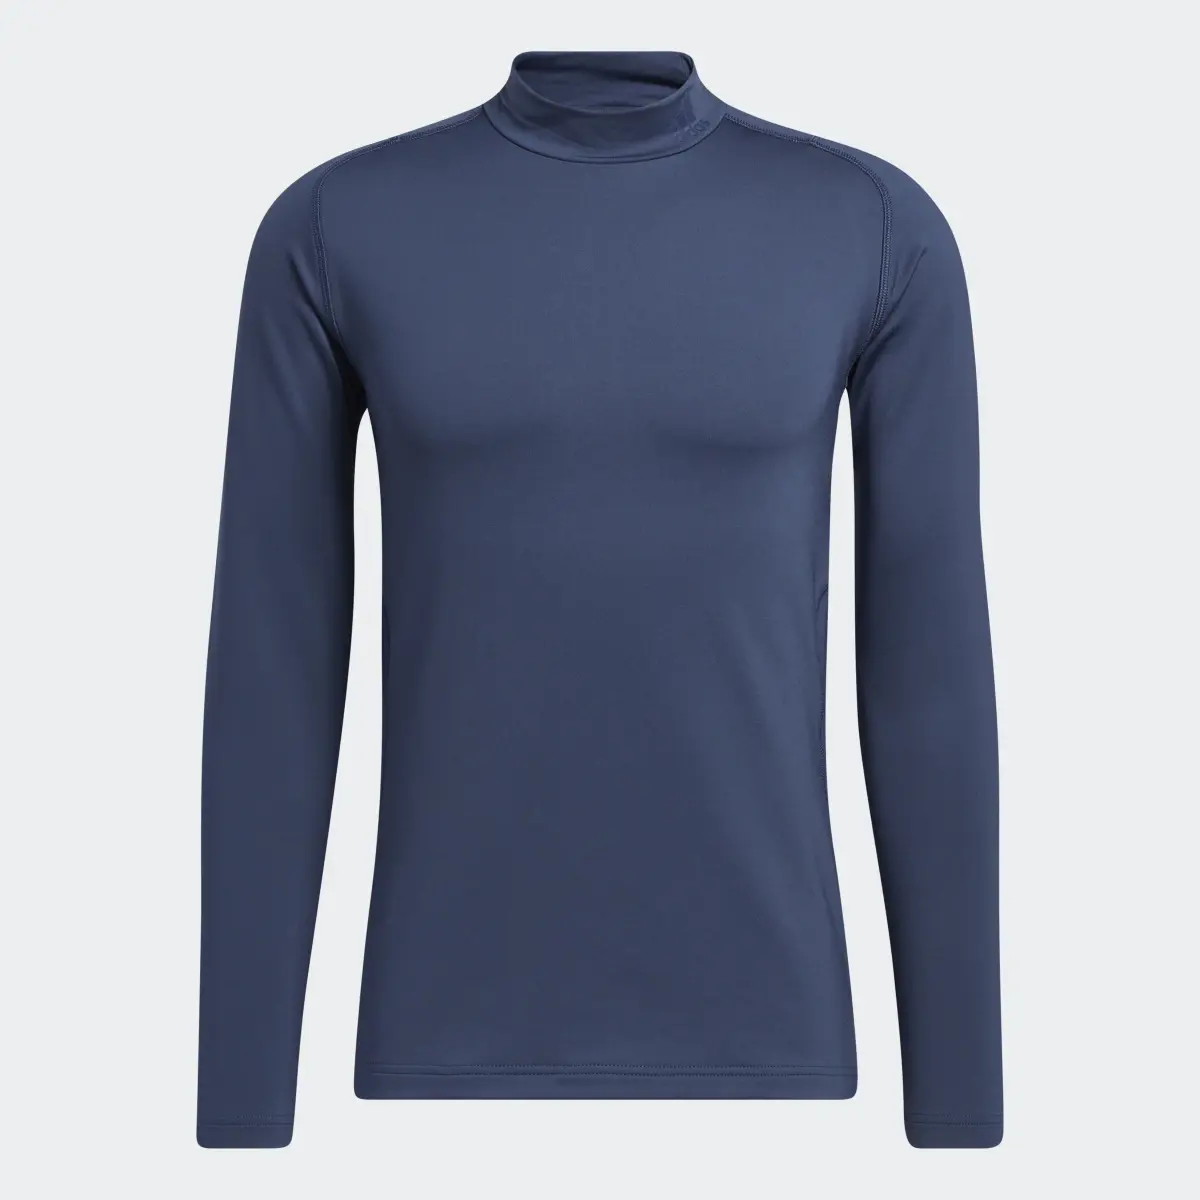 Adidas Sport Performance Recycled Content COLD.RDY Baselayer. 1